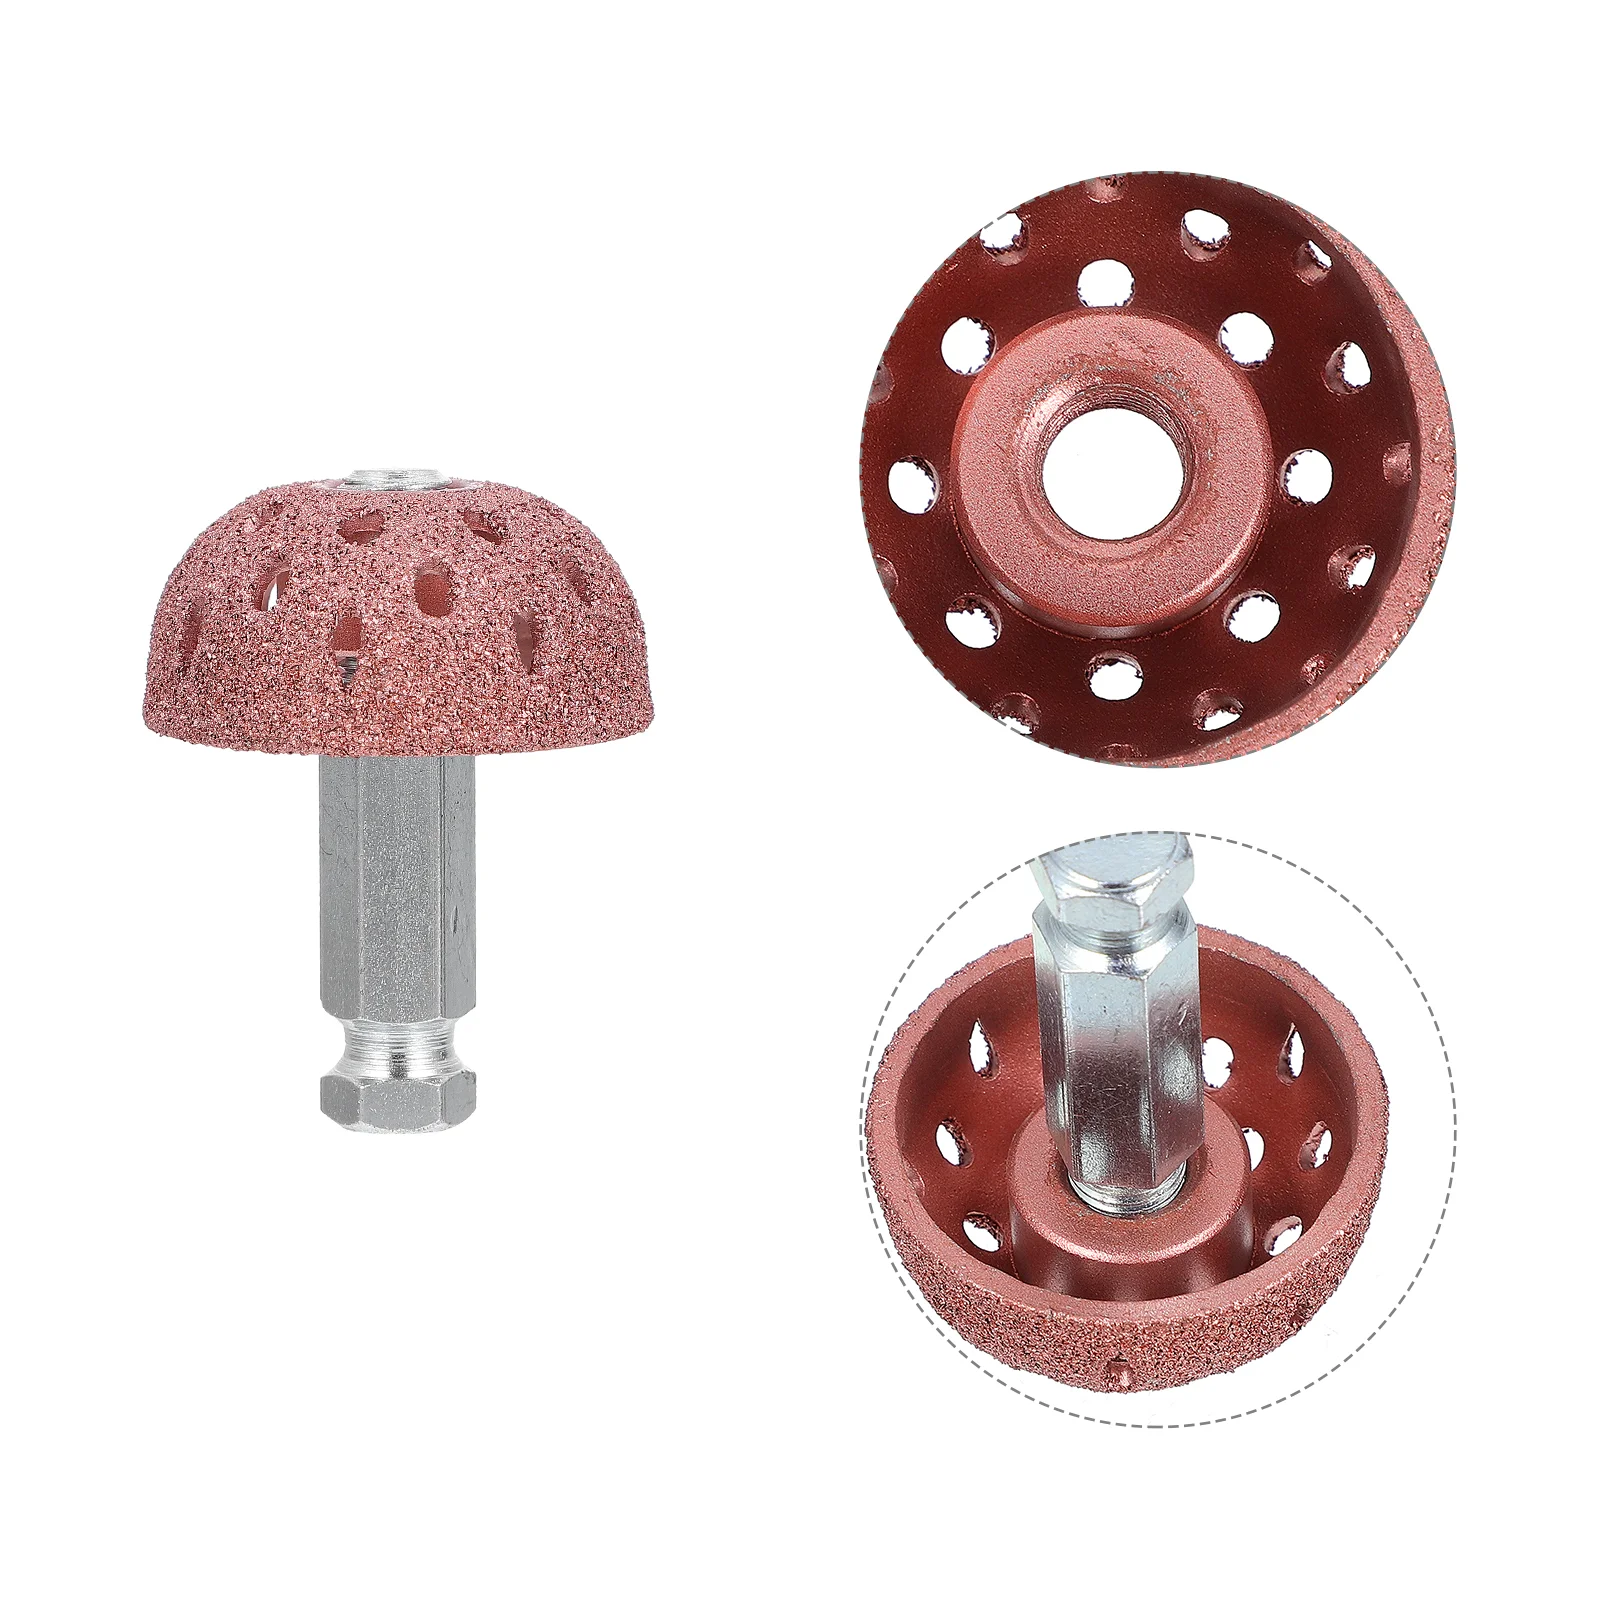 

1 Set/ 2PCS 40mm Tire Buffer Wheel with Linking Rod Abrasiveness Coarse Buffing Wheel Tire Repair Grinding Rotary Tools